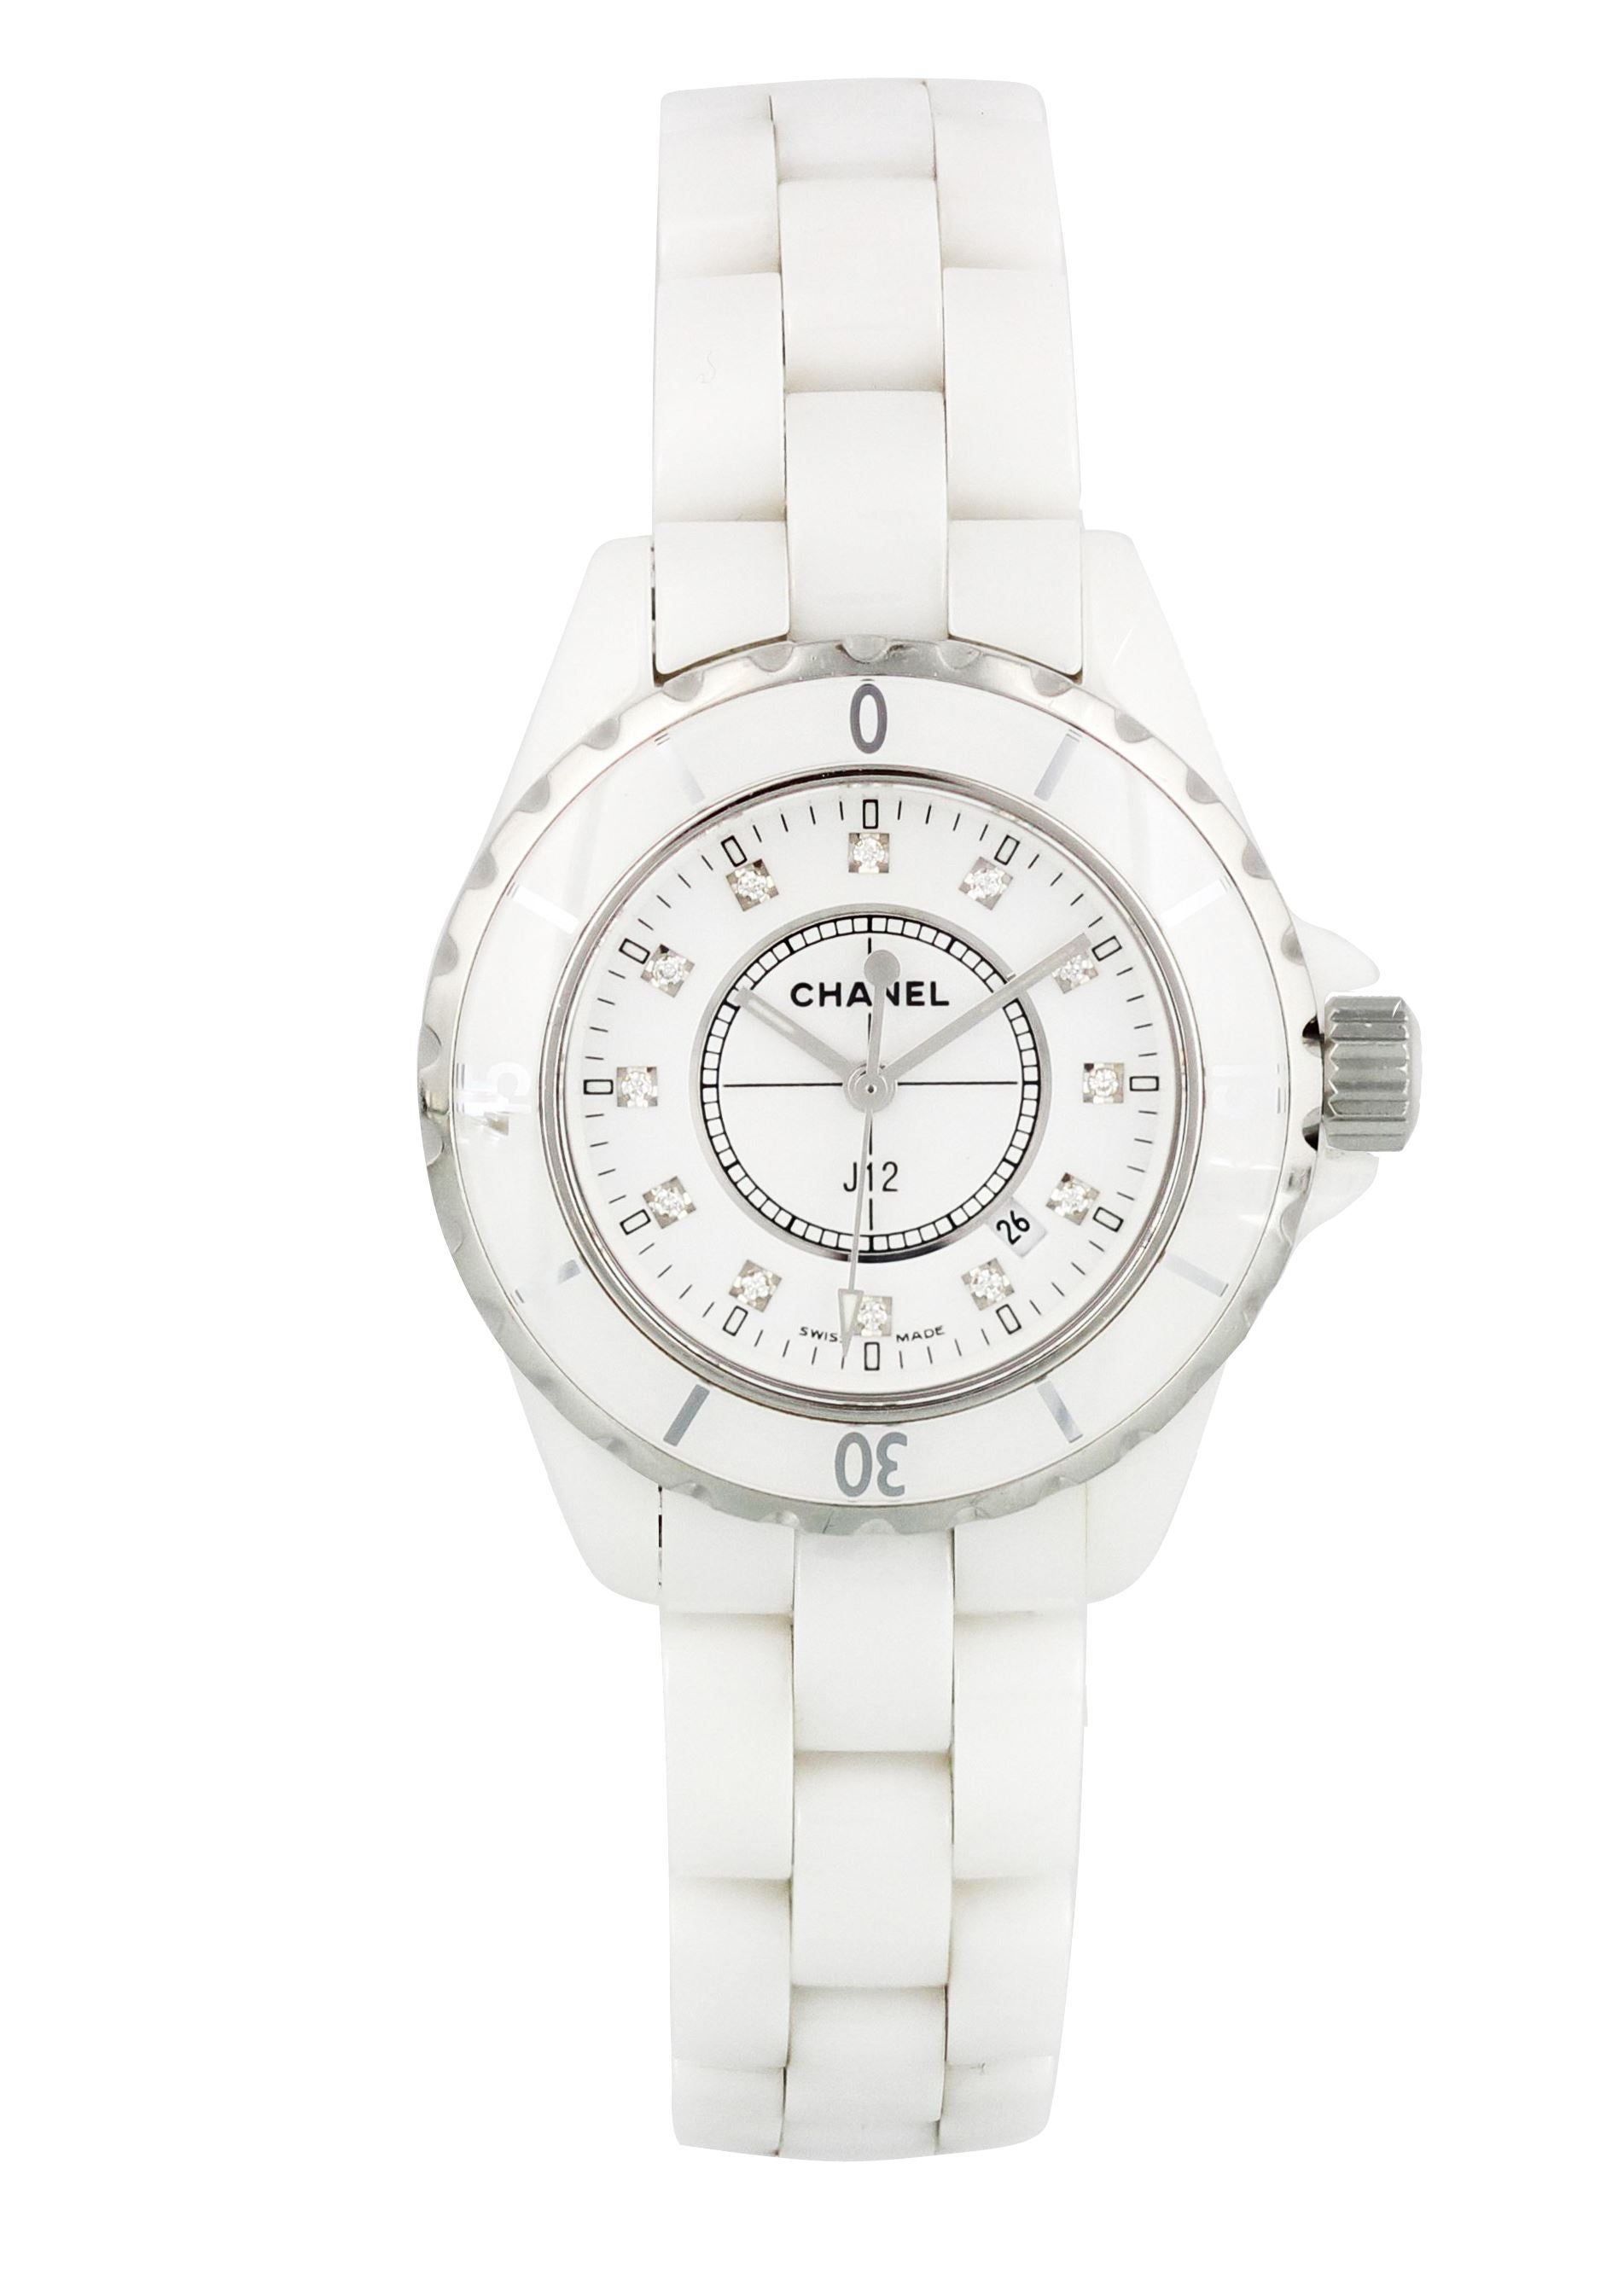 Chanel Mademoiselle J12 La Pausa Reference H7481, A White Ceramic Automatic  Wristwatch, Circa 2023 Available For Immediate Sale At Sotheby's